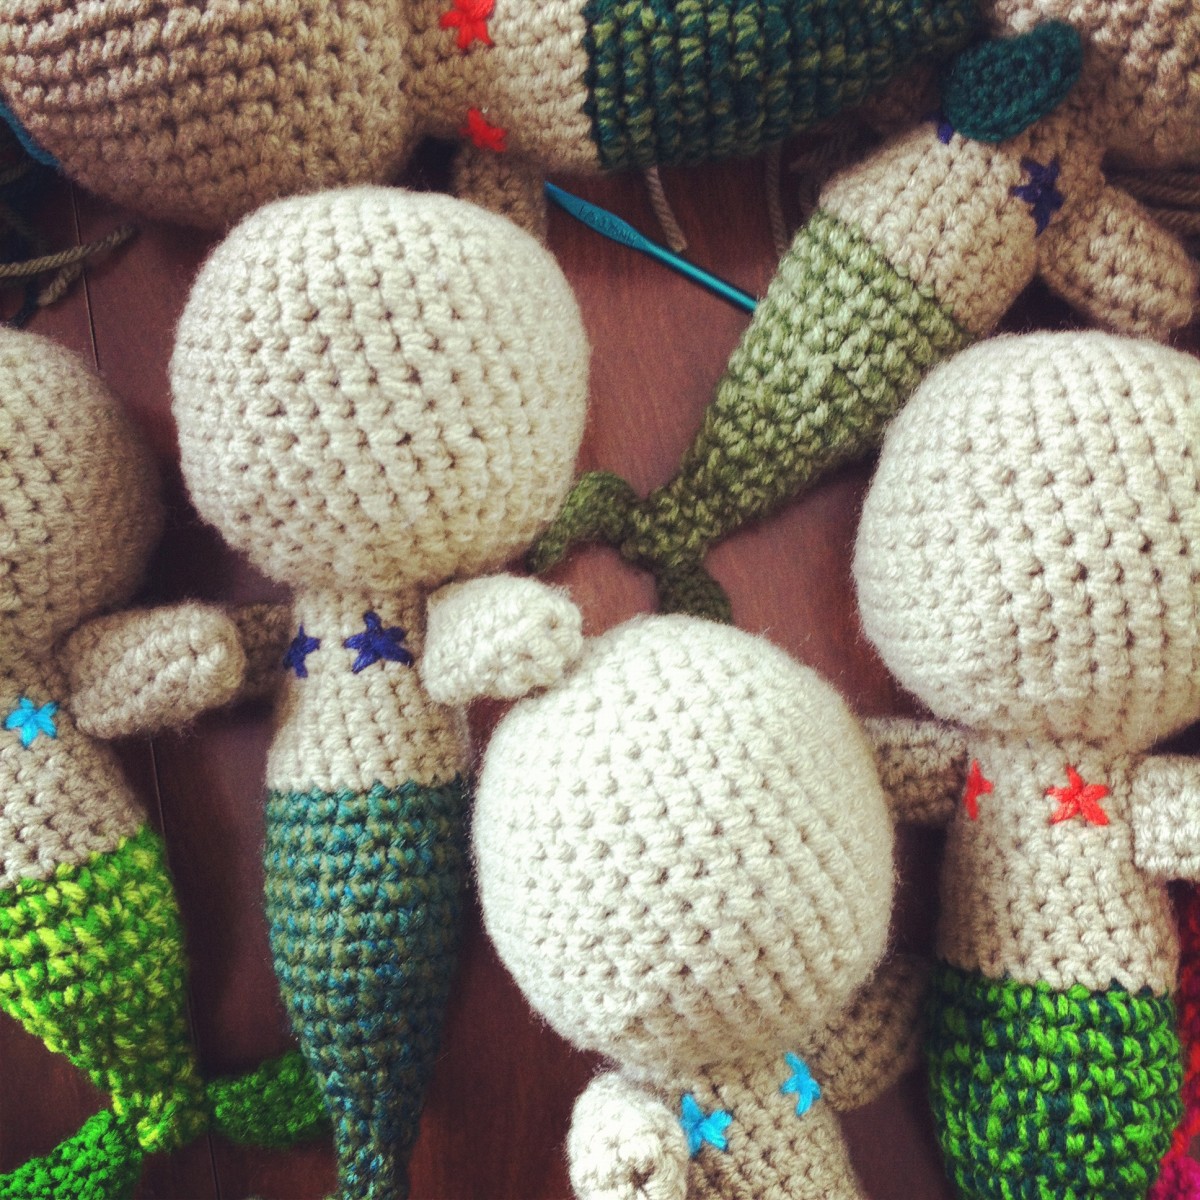 Here are some nearly finished mermaid dolls.